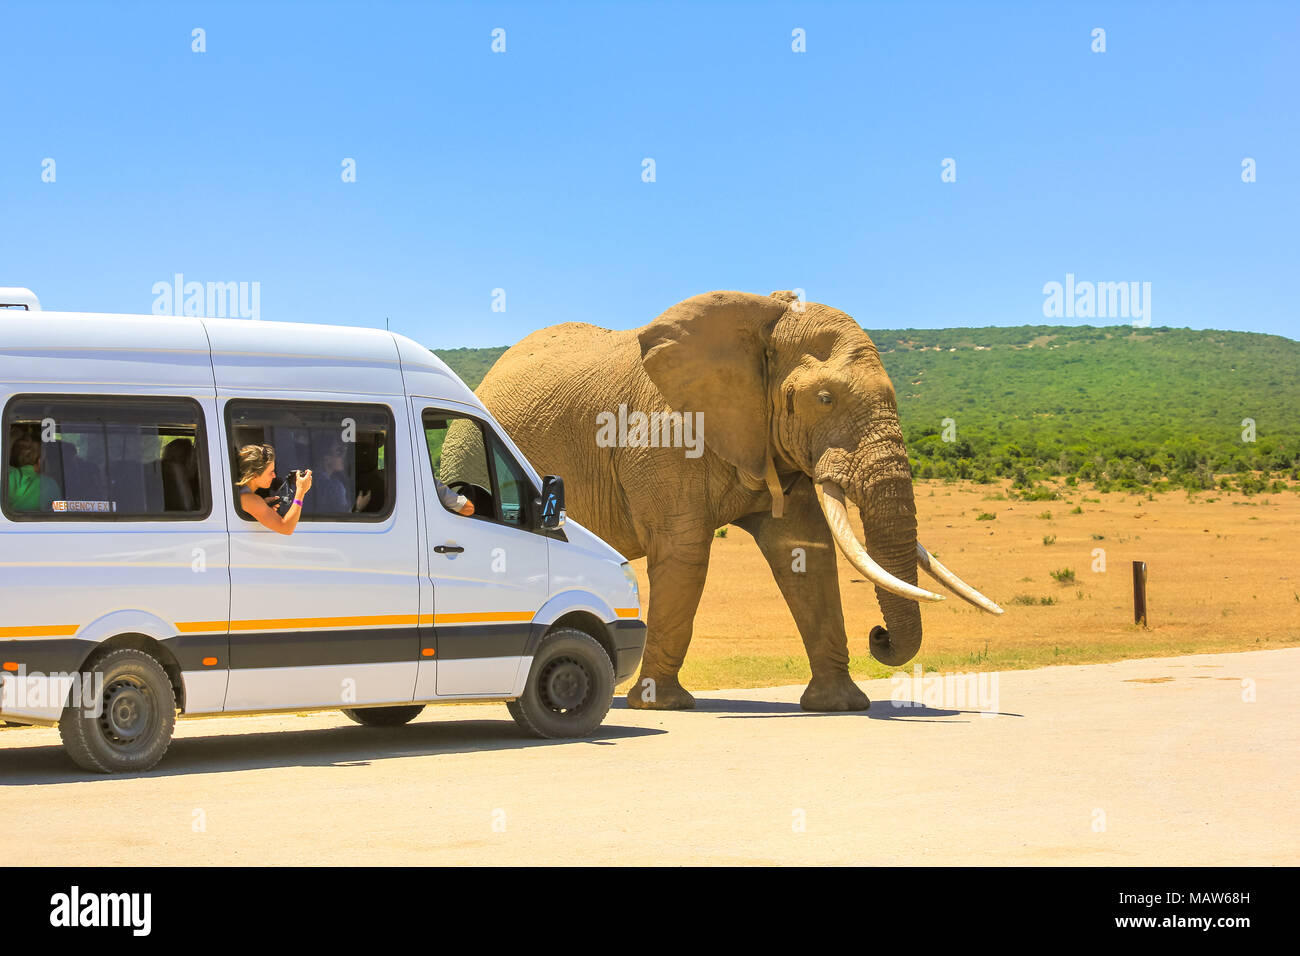 Addo, South Africa - January 3,2014: Tourist woman photograph an African Elephant from a tour bus in Addo Elephant Park in South Africa. Elephant walks in front of a pickup truck on a safari in Africa Stock Photo